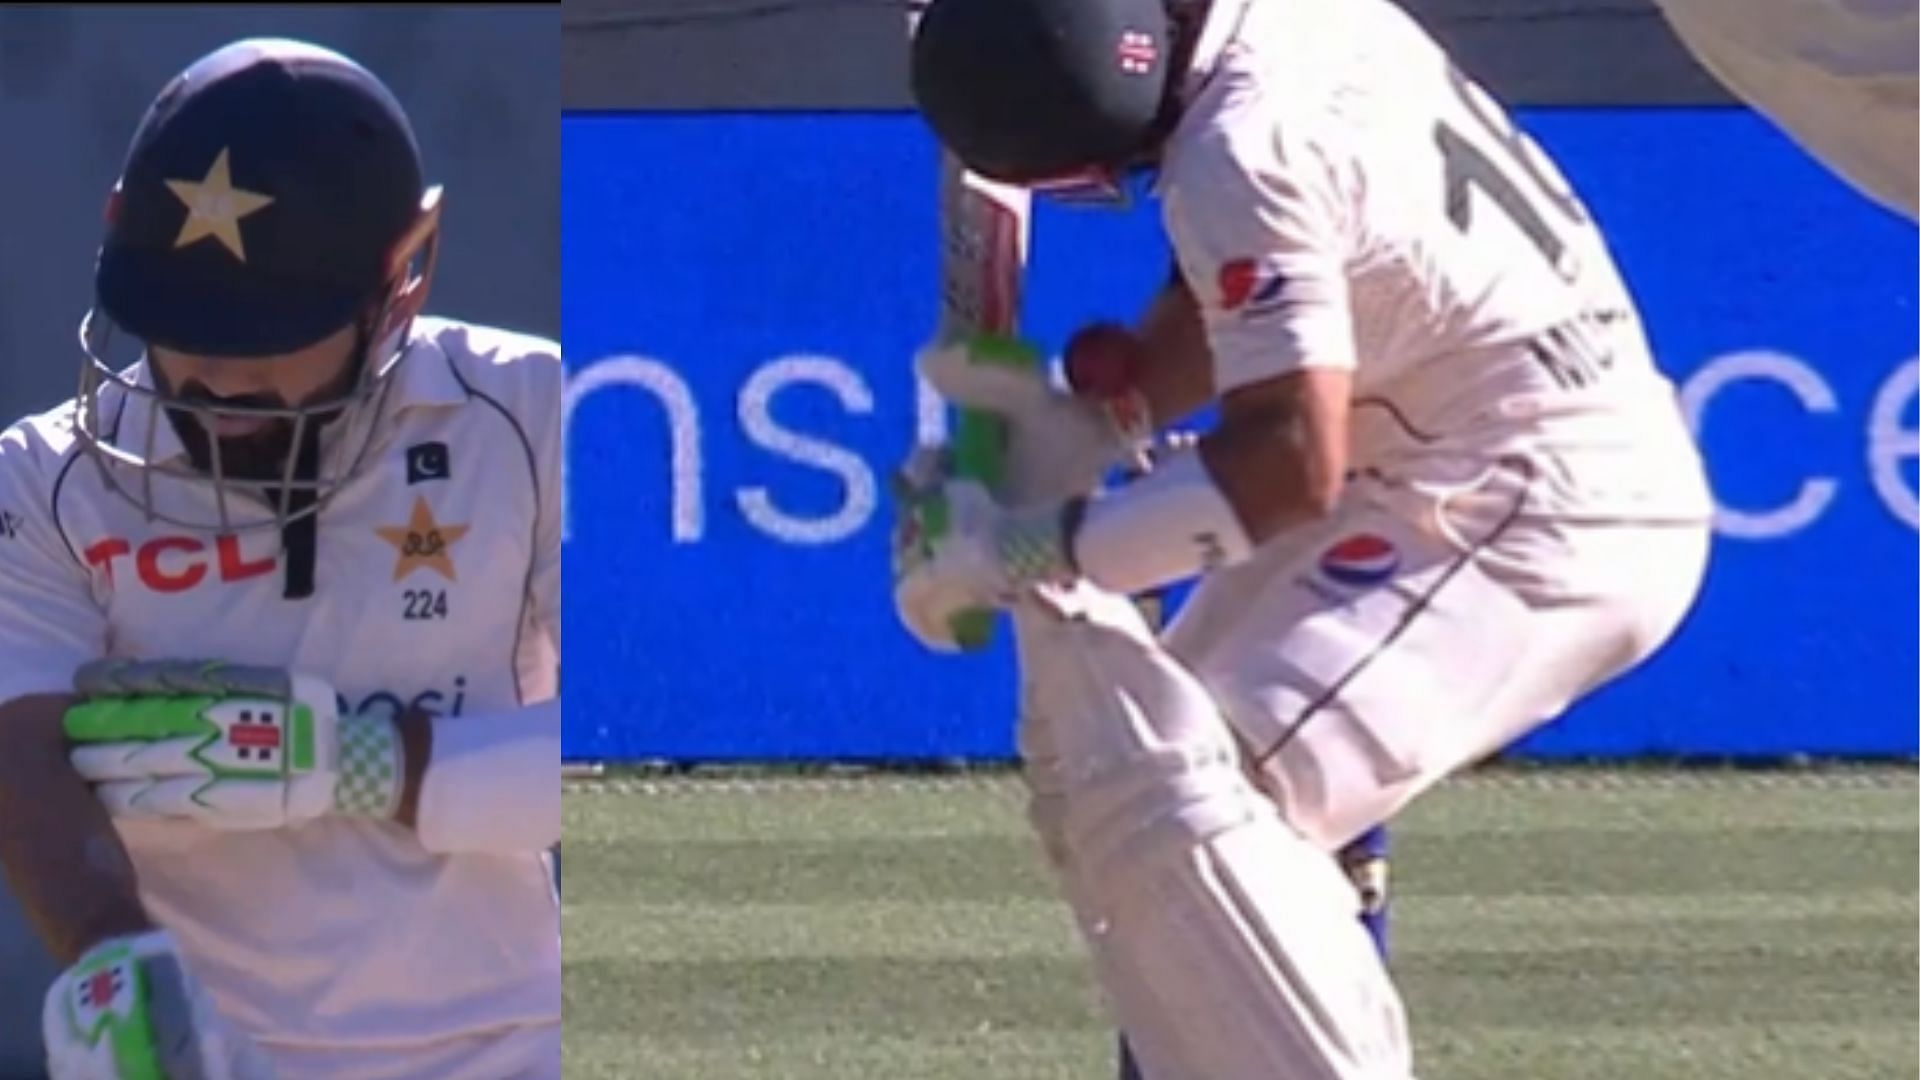 [Watch] Mohammad Rizwan dismissed caught behind after the ball grazes his wristband in 2nd AUS vs PAK Test